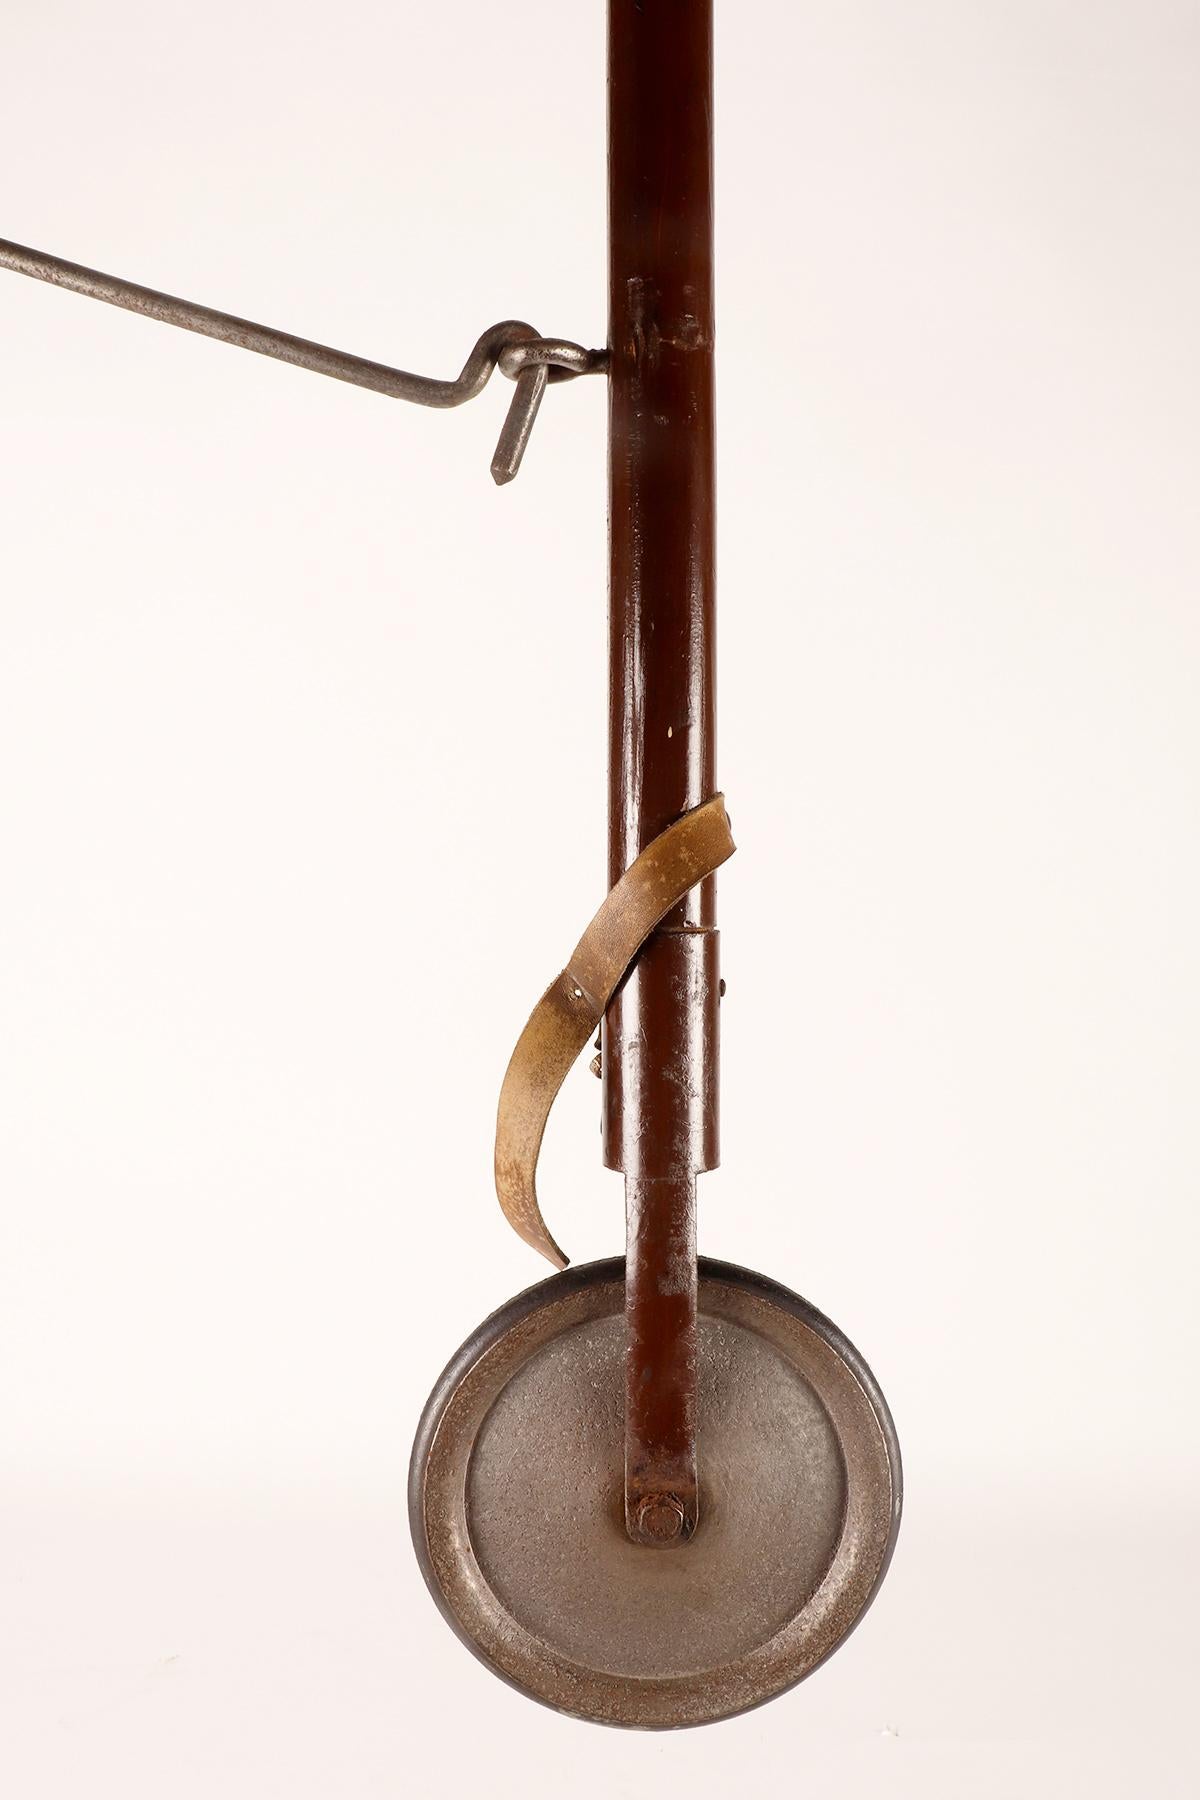 20th Century Gadget-system walking stick with bag holder function, Germany, 1920s.